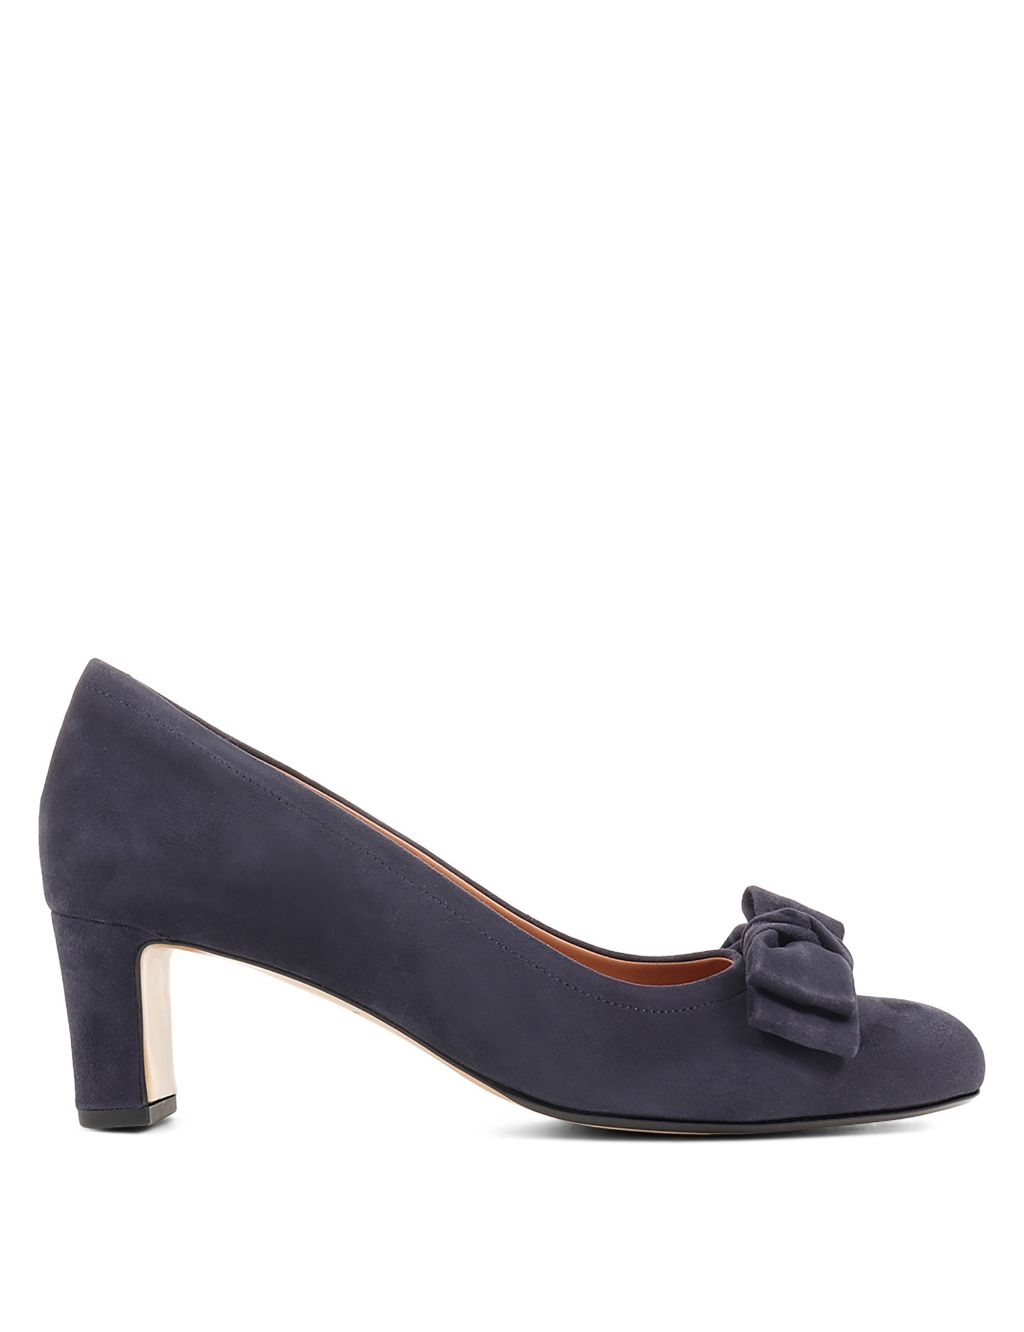 Suede Bow Block Heel Court Shoes image 5